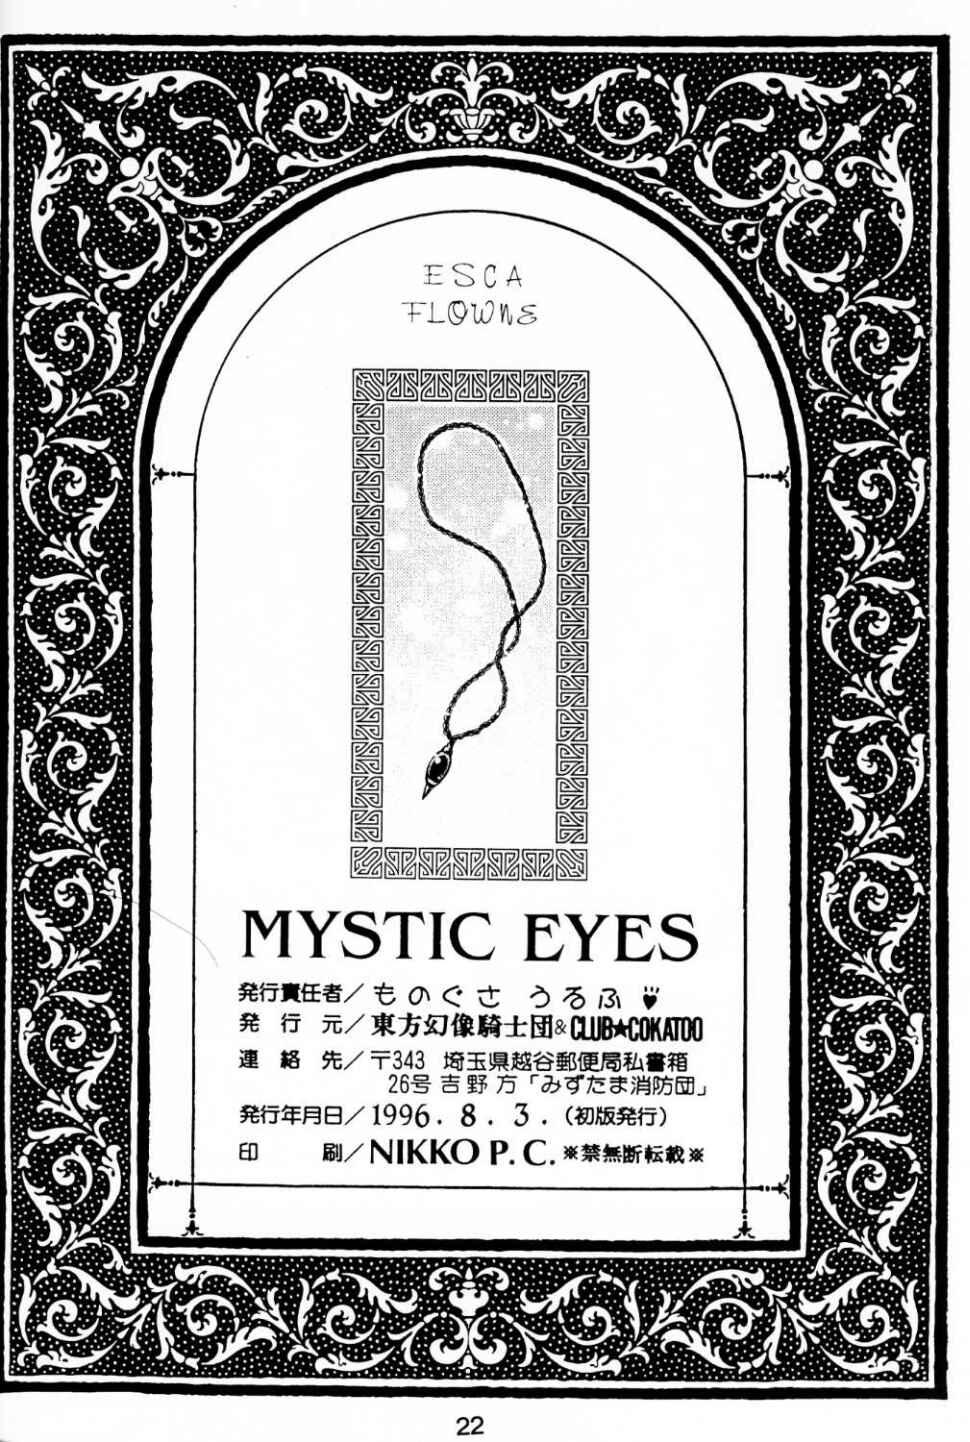 Gozo MYSTIC EYES - The vision of escaflowne Hunk - Page 21